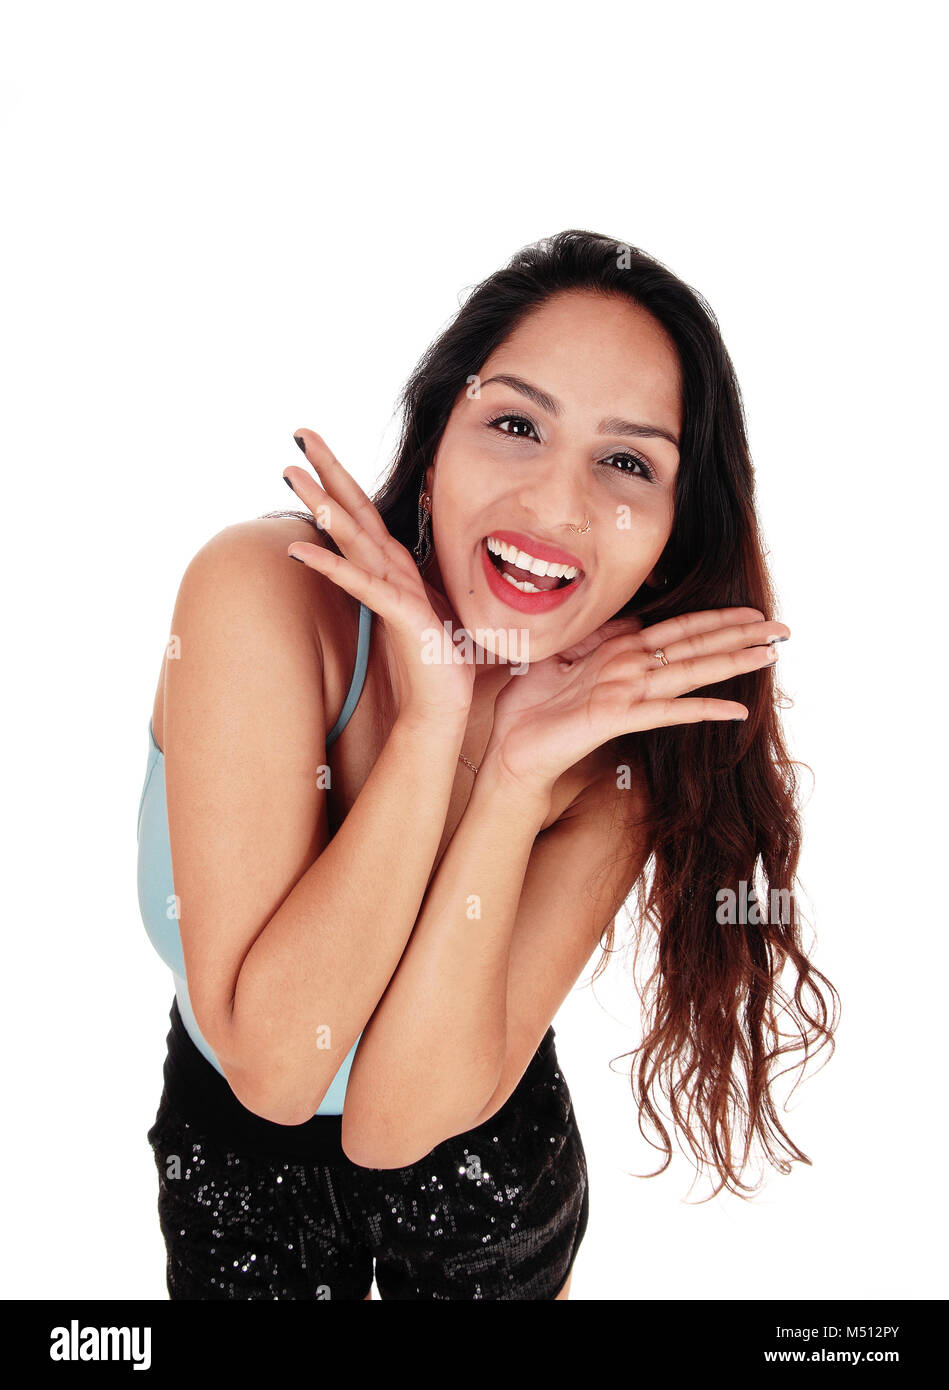 Happy young woman laughing Stock Photo